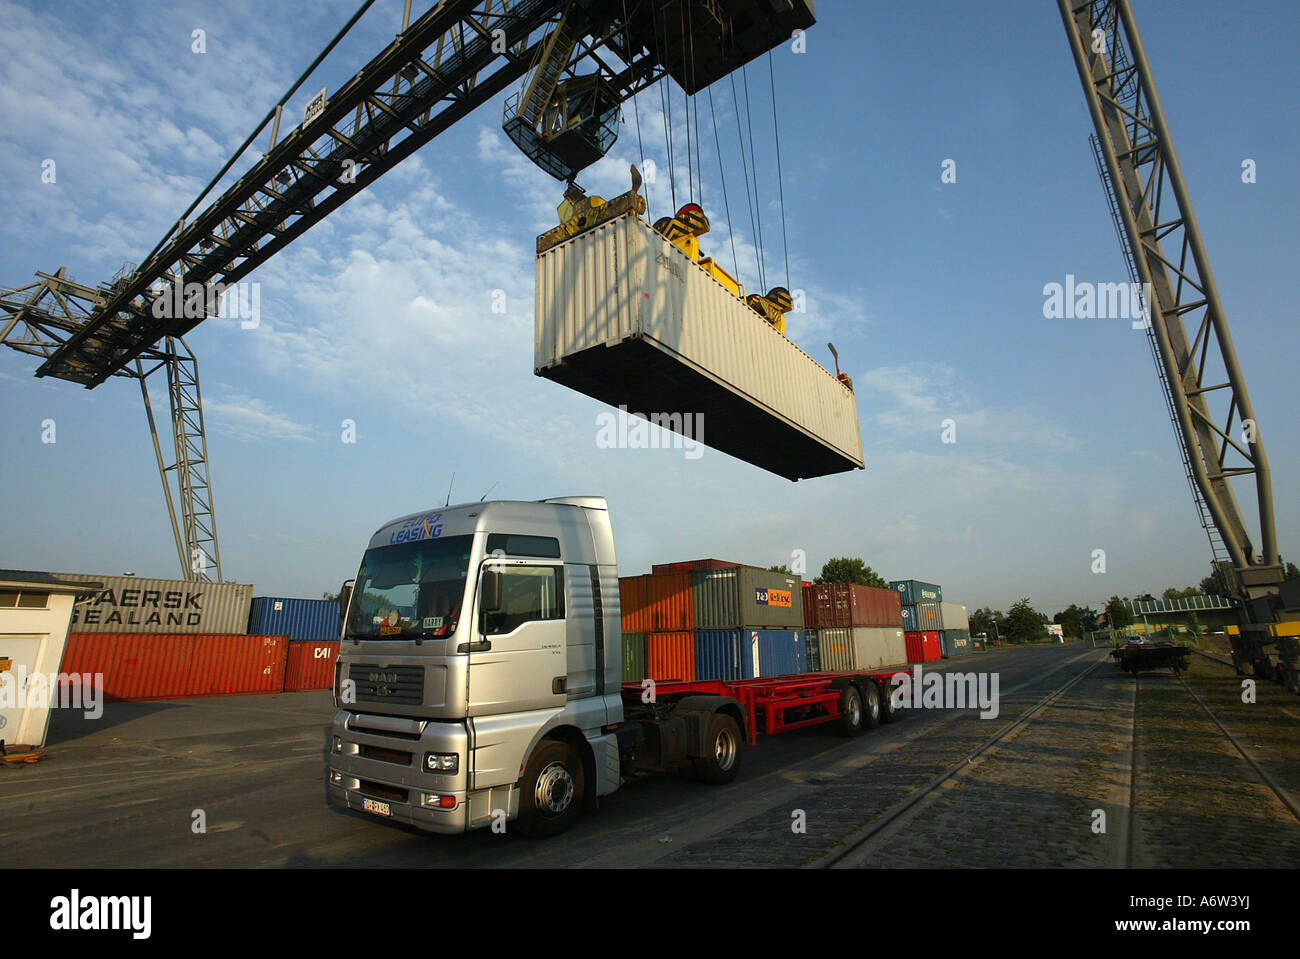 A crane loading container on a truck. Koblenz, Rhineland-Palatinate, Germany Stock Photo